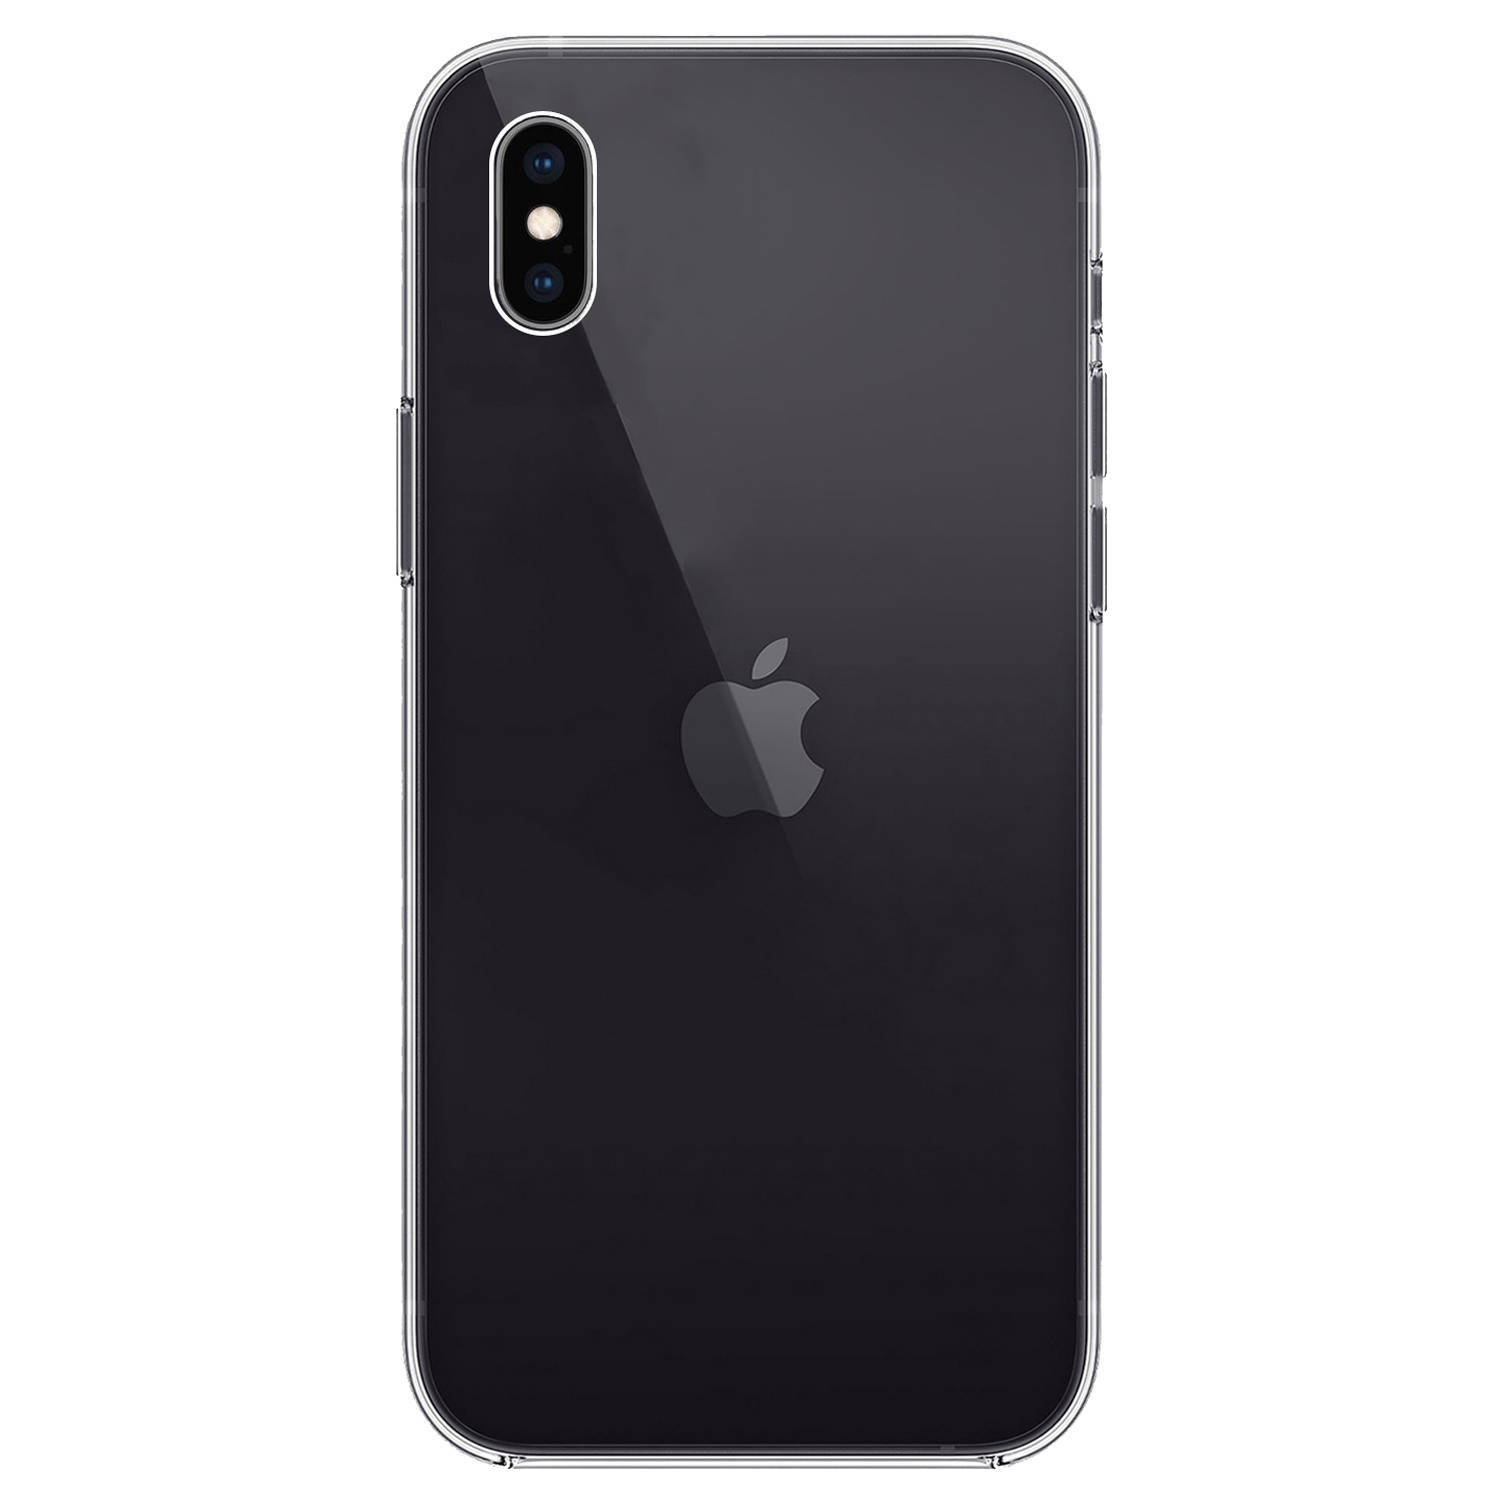 Basey Hoes voor iPhone X Hoesje Siliconen Back Cover Case - Hoes voor iPhone X Hoes Silicone Case Hoesje - Transparant